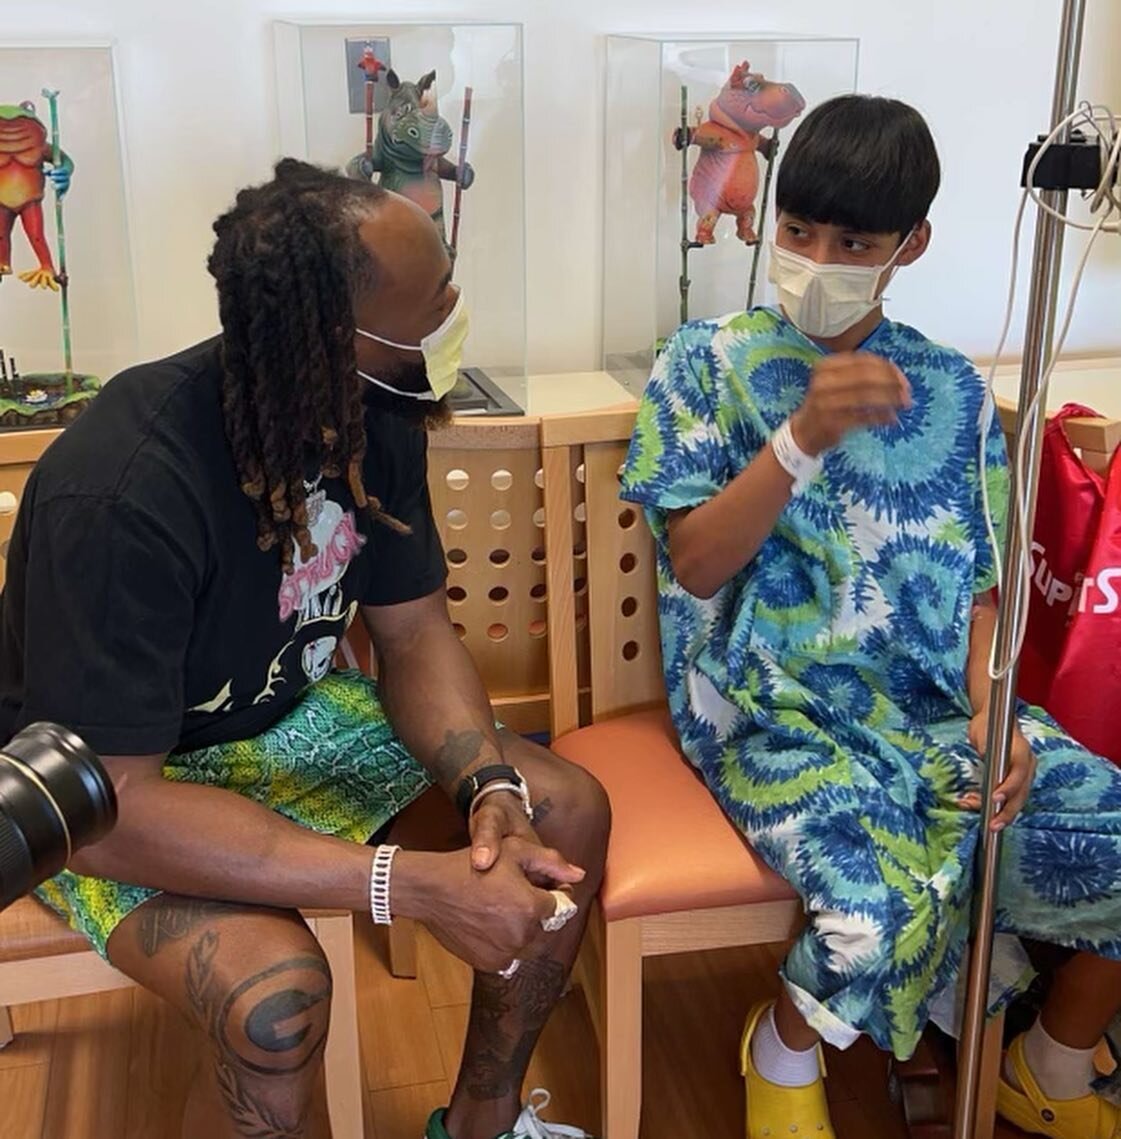 We got to hang out with @showtyme_33 &amp; our friends at @elpasochildrenshospital today 🤍

Thank you @worldtechtoys @lokai @apple for always blessing the families 🙏🏻